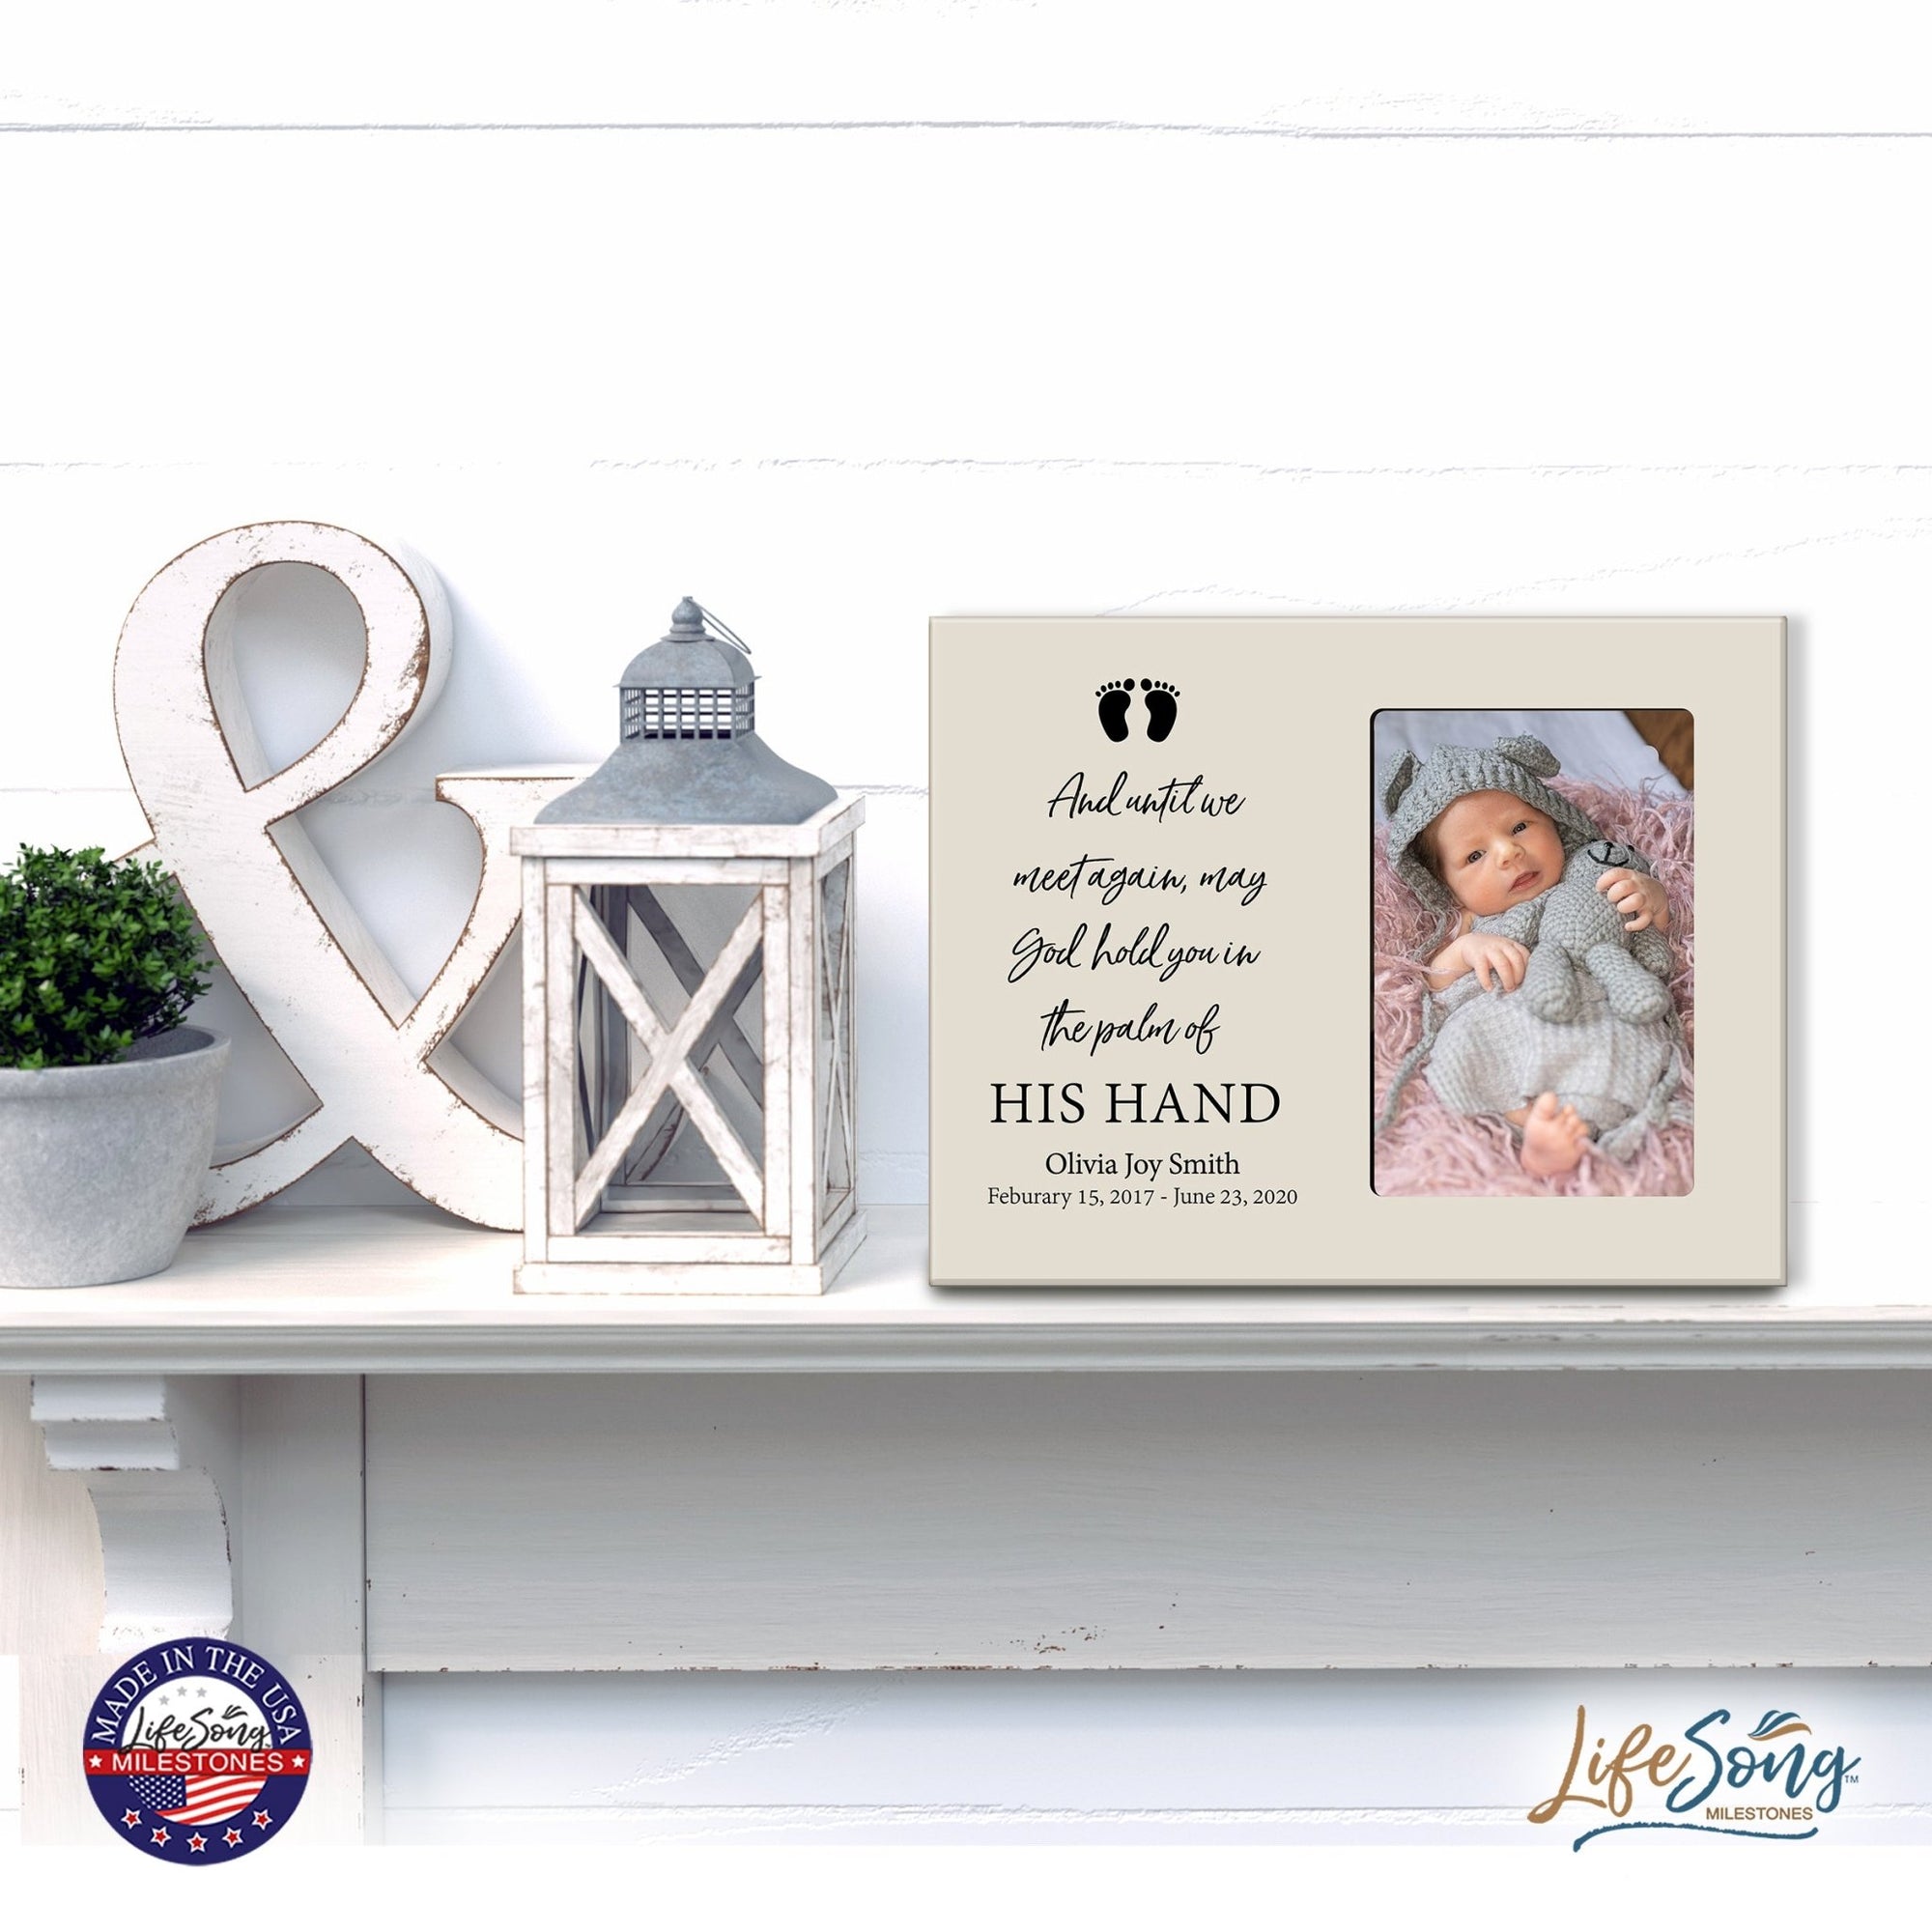 Personalized Wooden Memorial 8x10 Picture Frame holds 4x6 photo for Baby - Until We Meet Again - LifeSong Milestones